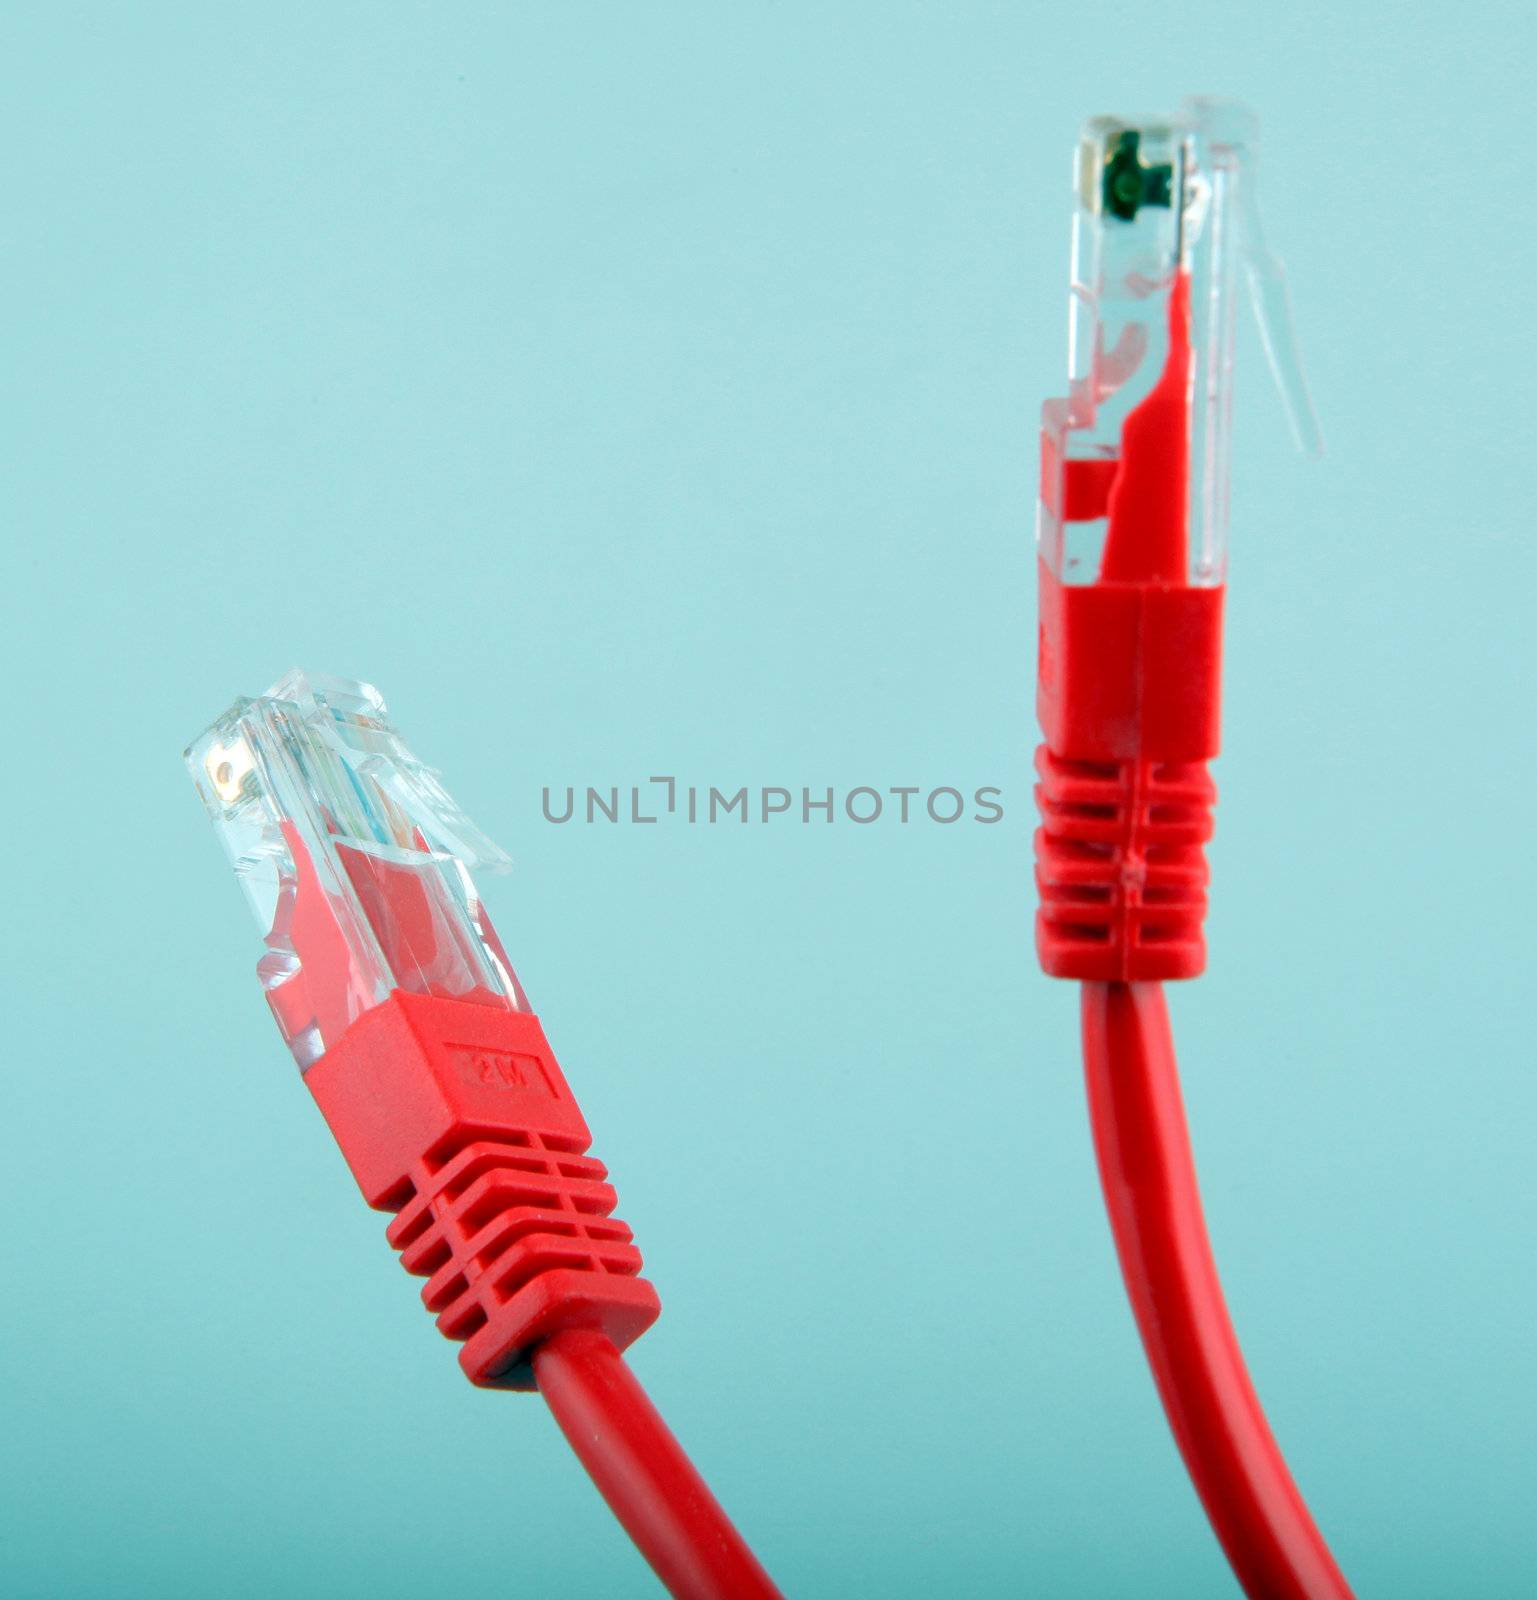 Ethernet network cables